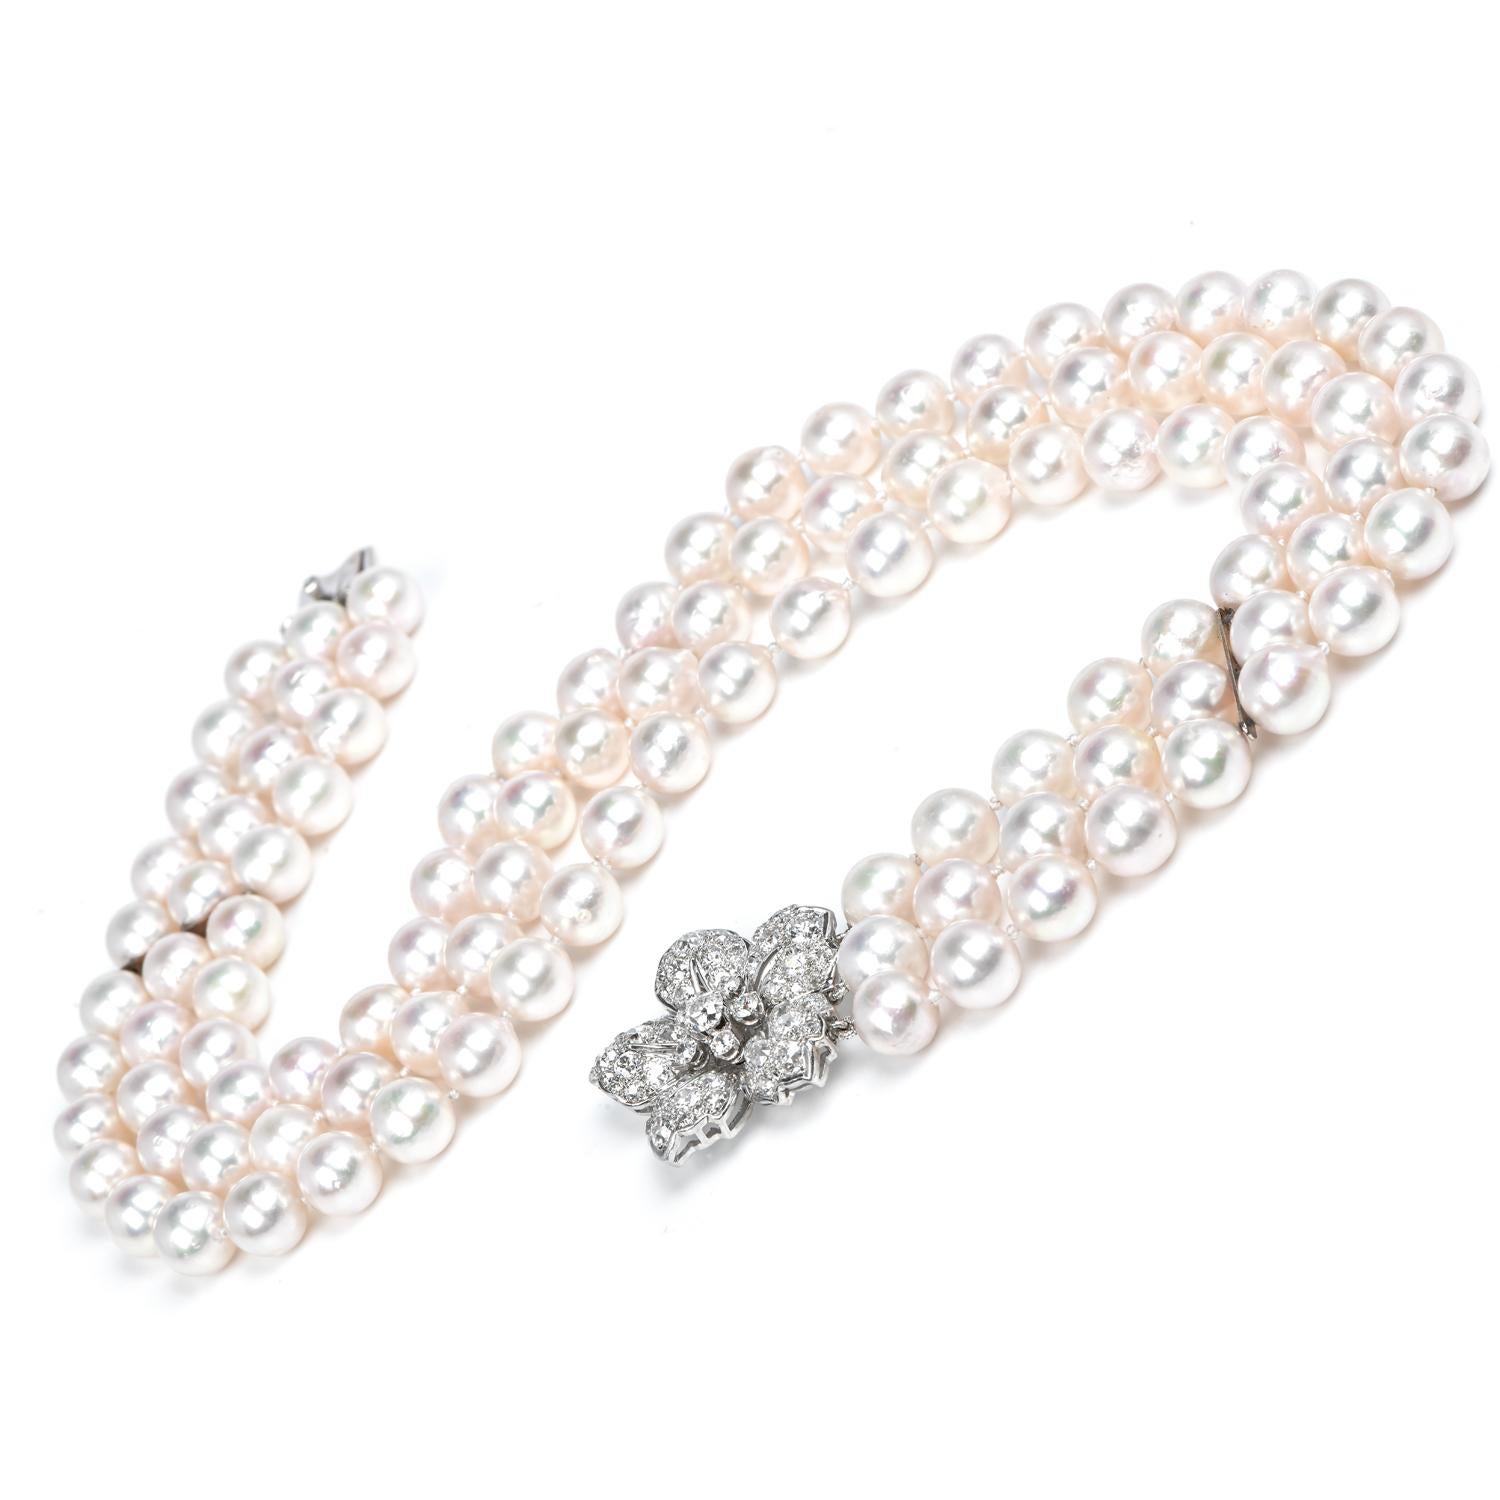 In addition to your diamond & pearl collection, this necklace is the upgrade to bring your style to the next level. 

A triple strand of genuine Akoya High lustrous Japanese pearls, pink undertones with high luster & polish, measuring 9 mm.

The